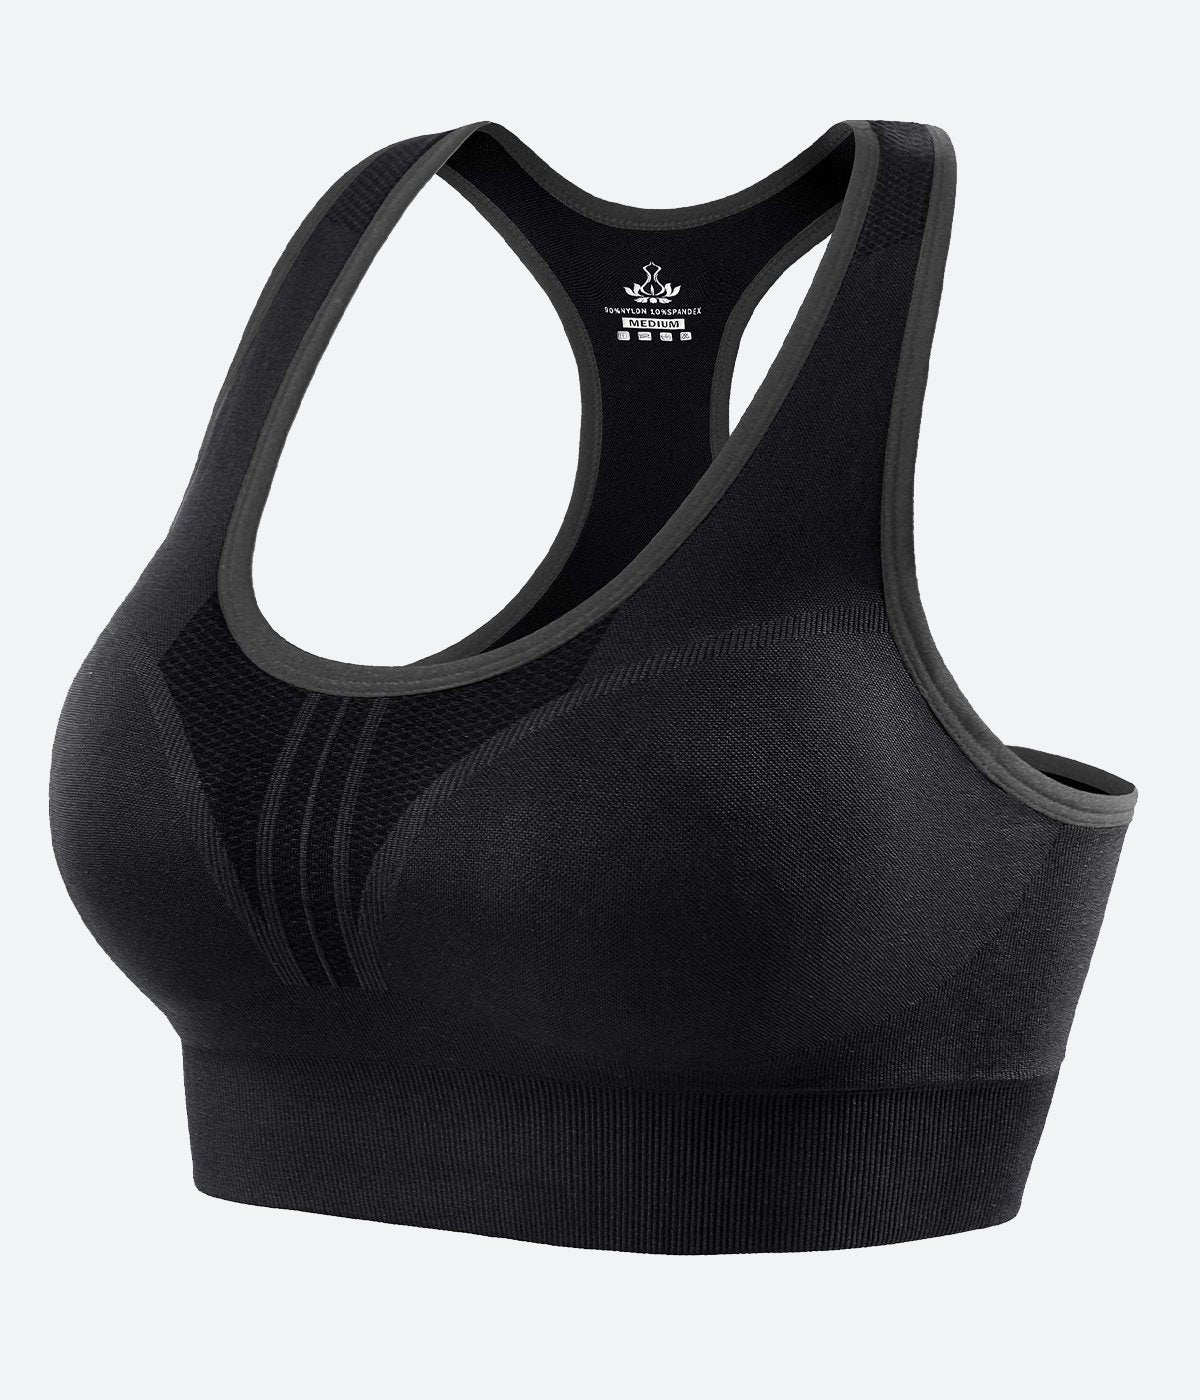 REDPAI Sports Bra High Impact Adjustable Racerback Yoga Bra Full Coverage  Wirefree Supportive Padded Workout Bras Women - black - 3X-Large -  ShopStyle Plus Size Clothing